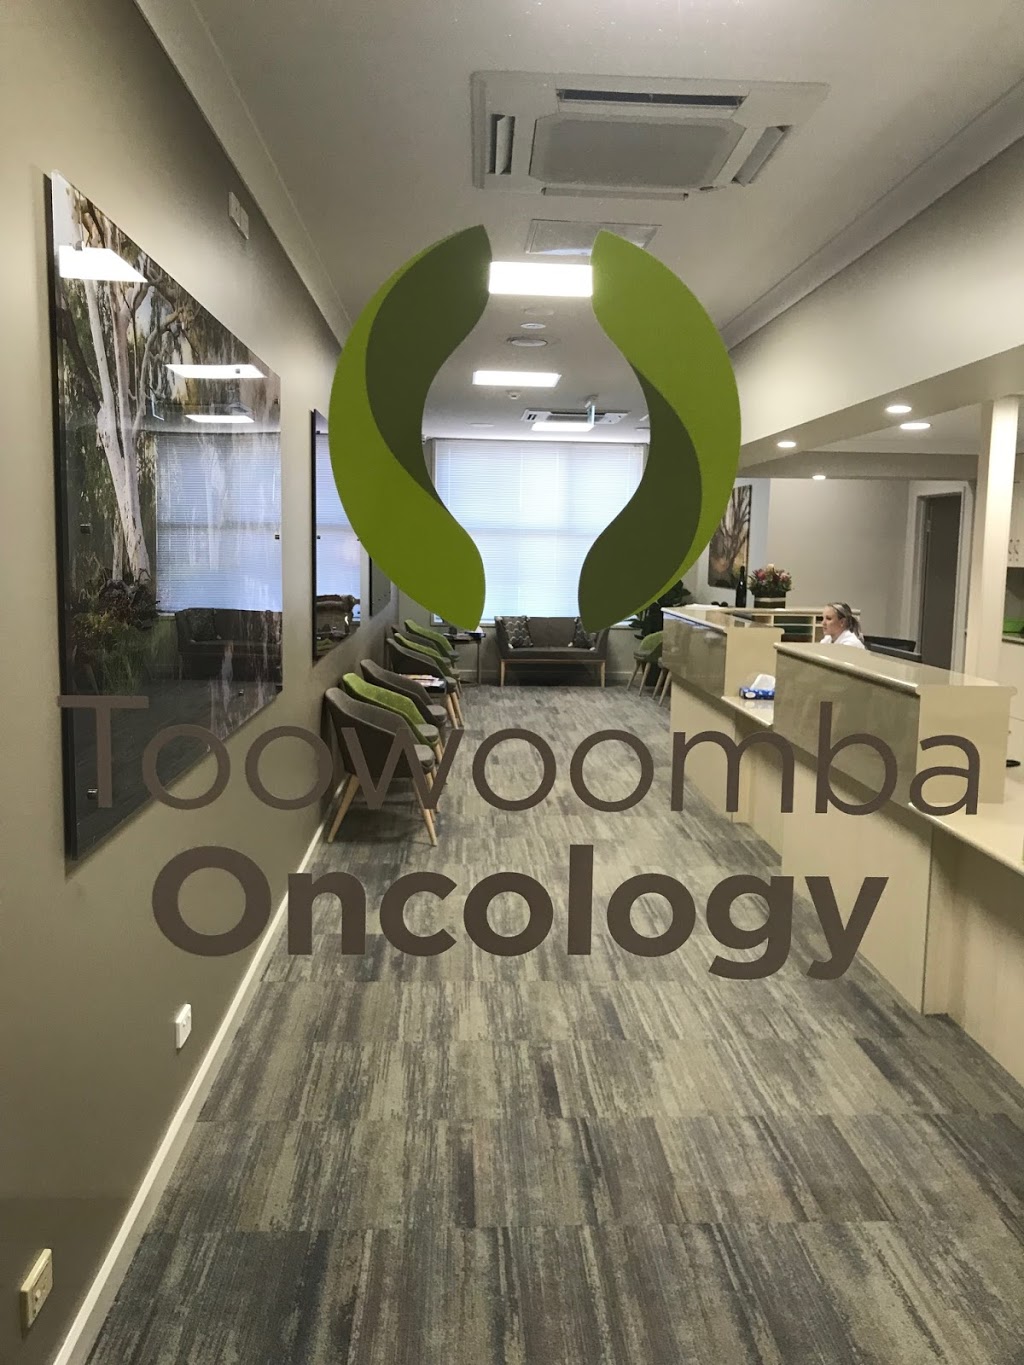 Toowoomba Oncology | health | Suite 36, St Andrews Hospital, 280 North St, Toowoomba City QLD 4350, Australia | 0746020396 OR +61 7 4602 0396